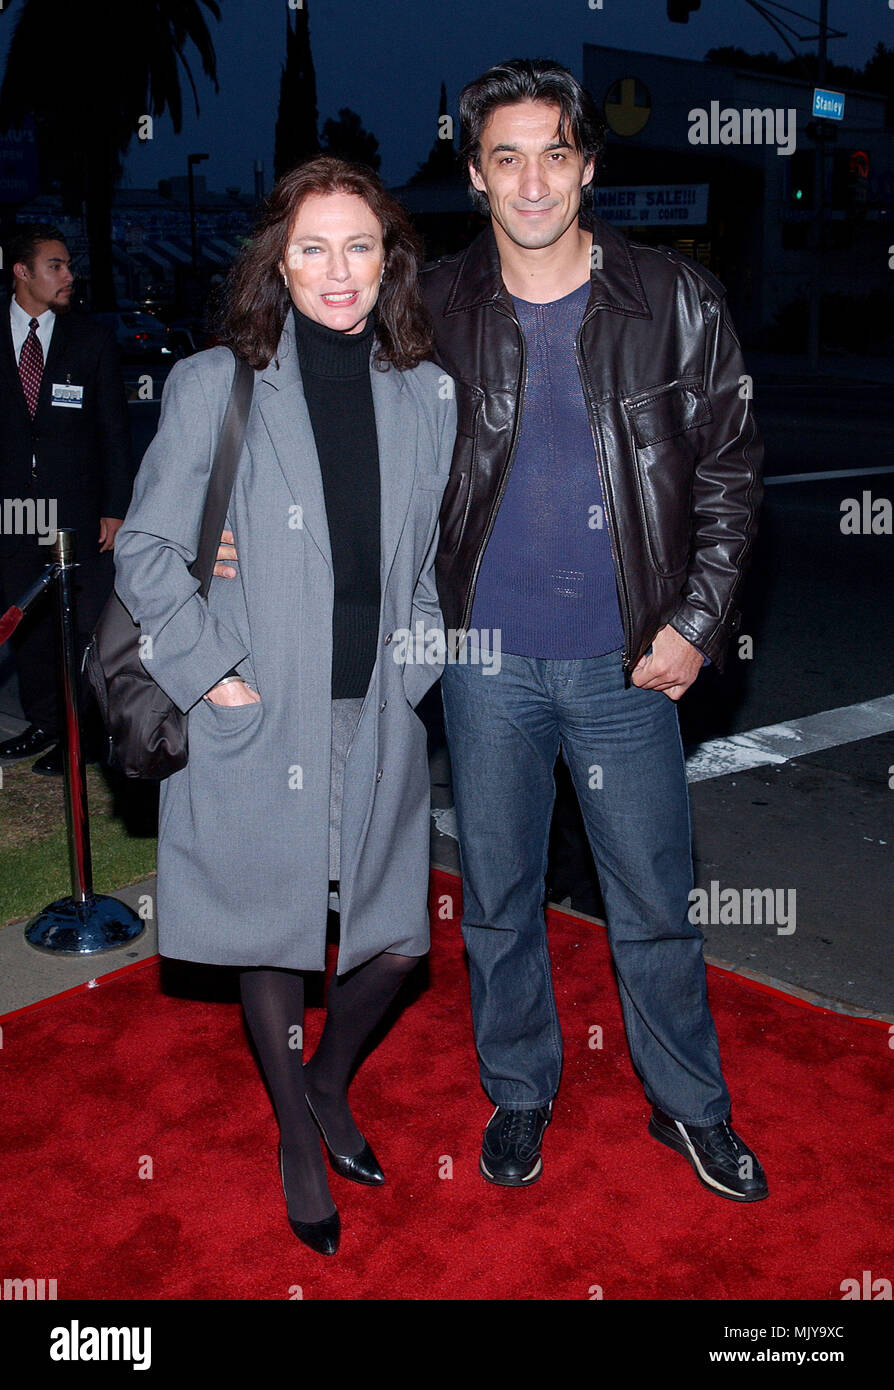 Jacqueline Bisset and Emin Boztepe arriving at the Cat's Meow Los Angeles premiere at the Harmony Gold Theatre in Los Angeles. April 10, 2002.           -            BissetJacqueline Emin01.JPG           -              BissetJacqueline Emin01.JPGBissetJacqueline Emin01  Event in Hollywood Life - California,  Red Carpet Event, Vertical, USA, Film Industry, Celebrities,  Photography, Bestof, Arts Culture and Entertainment, Topix Celebrities fashion /  from the Red Carpet-, Vertical, Best of, Hollywood Life, Event in Hollywood Life - California,  Red Carpet , USA, Film Industry, Celebrities,  mov Stock Photo